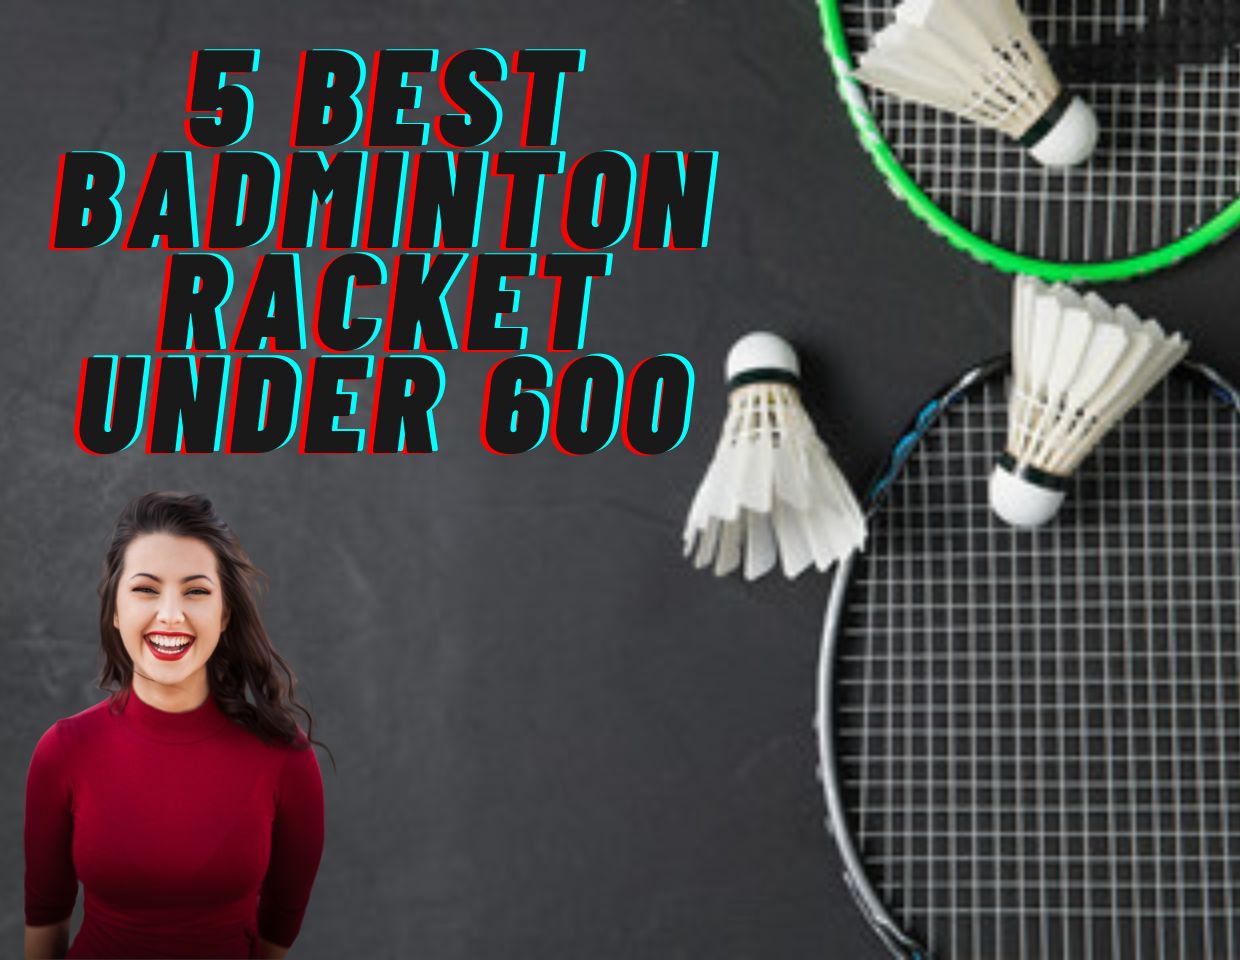 5 Best Badminton Racket Under 600 [Buyer's Guide and Reviews]